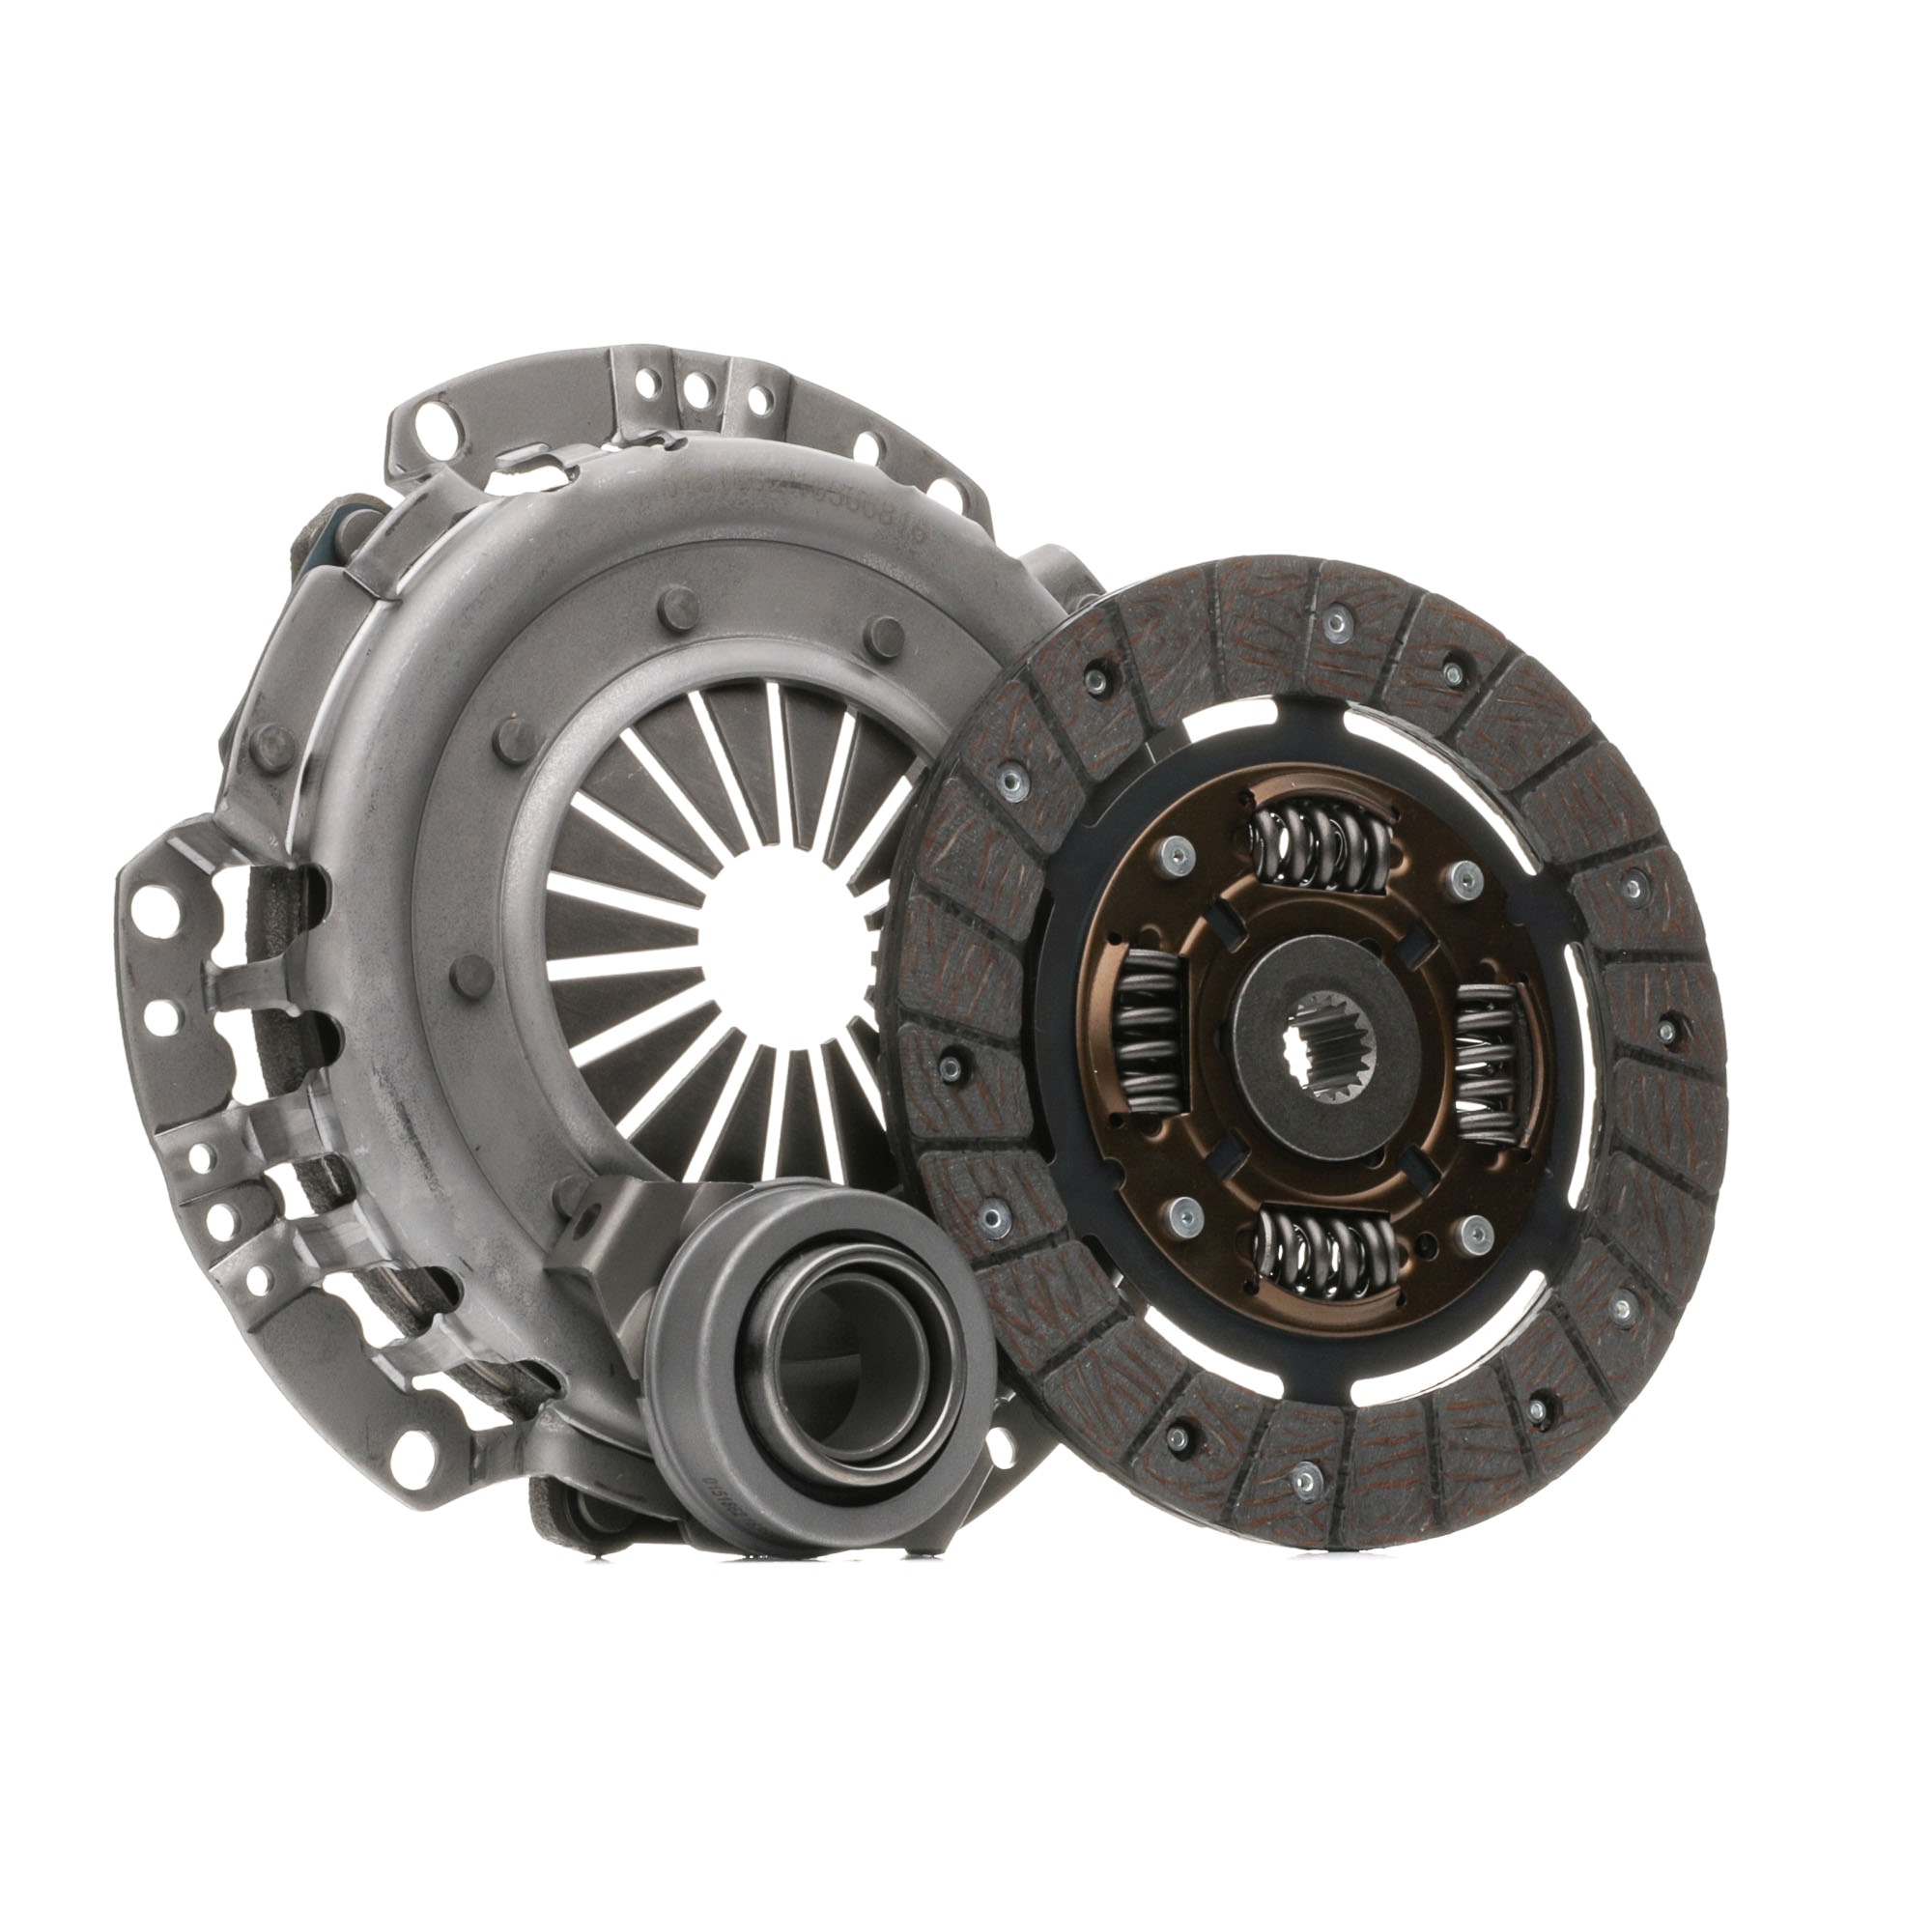 Original SKCK-0101585 STARK Clutch kit experience and price